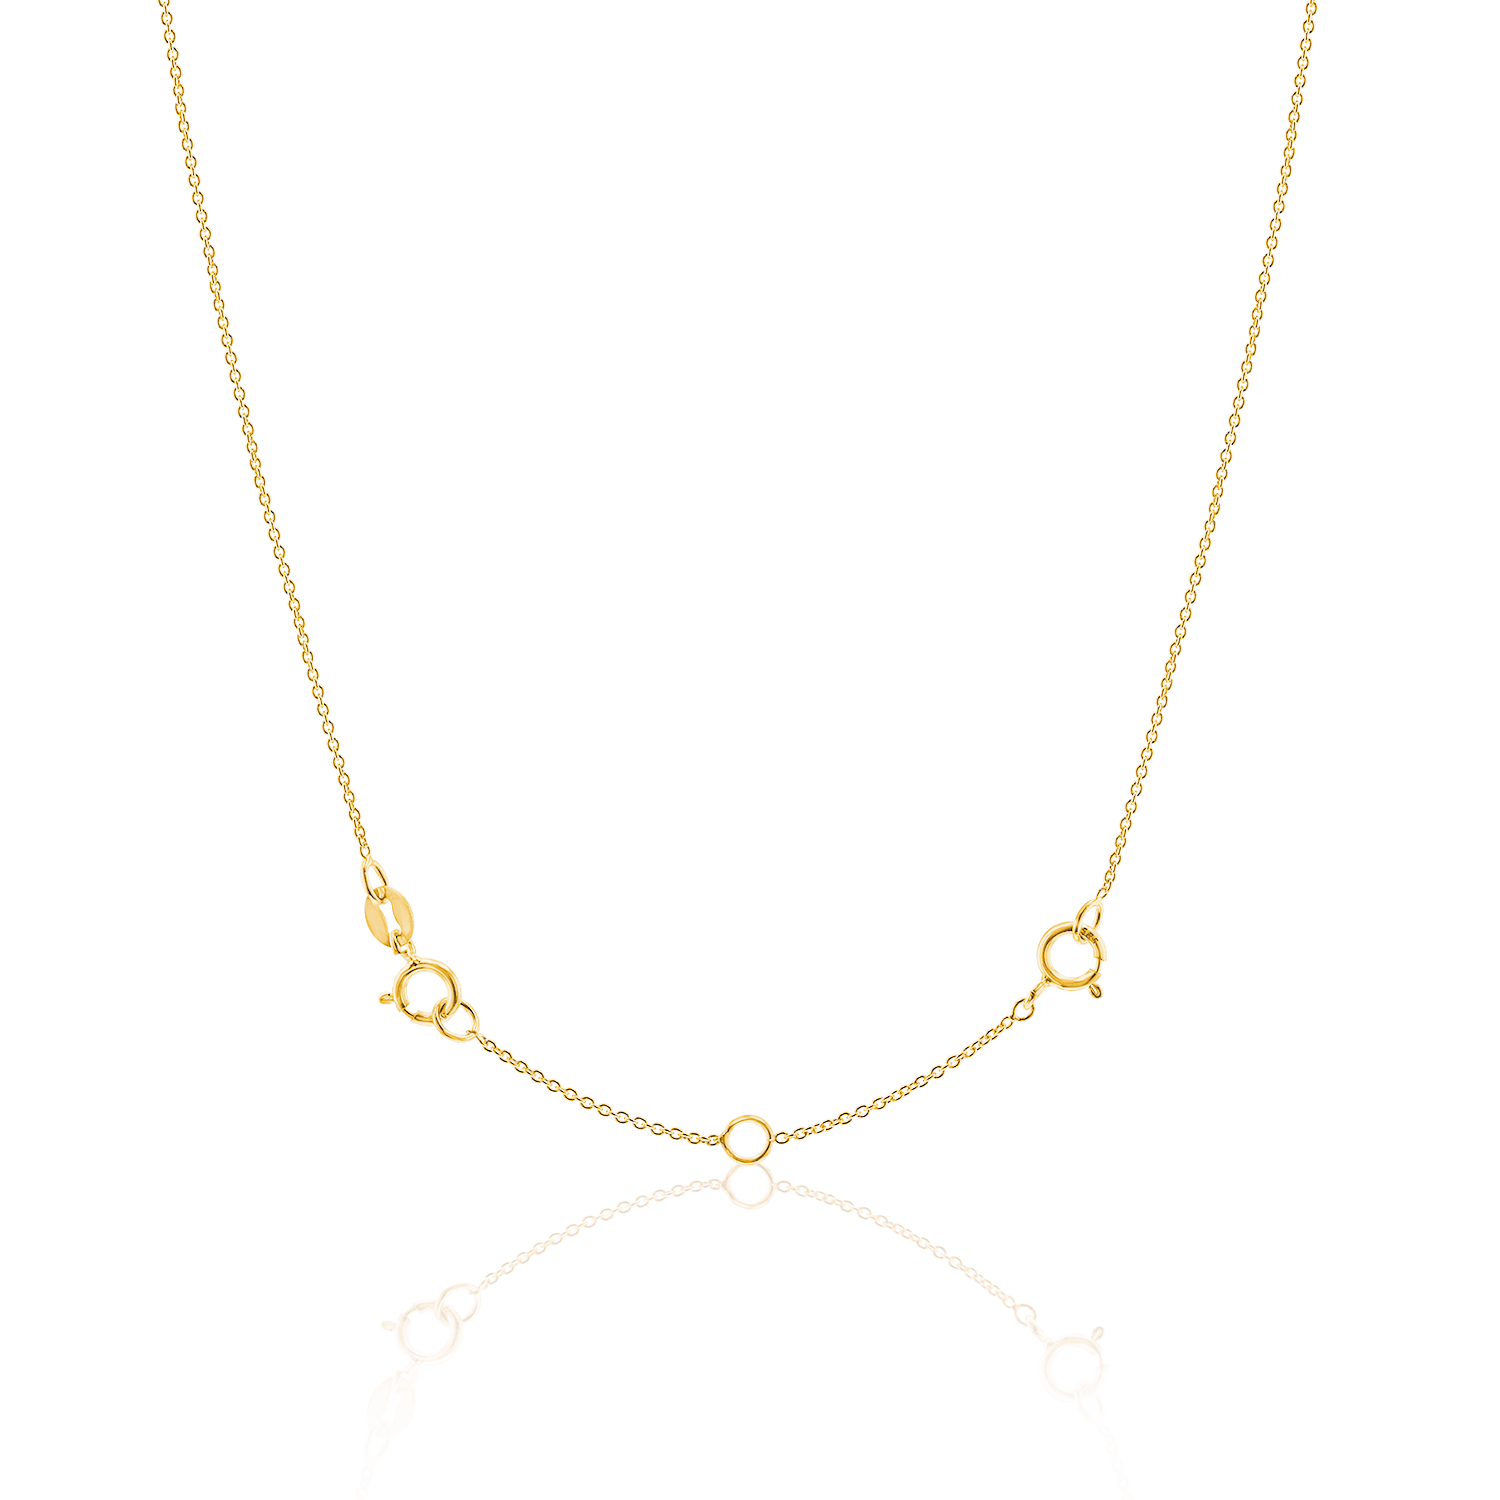 Necklace Extender and Safety Chains in 14k Yellow and White Gold - Boomer  Style MagazineBoomer Style Magazine